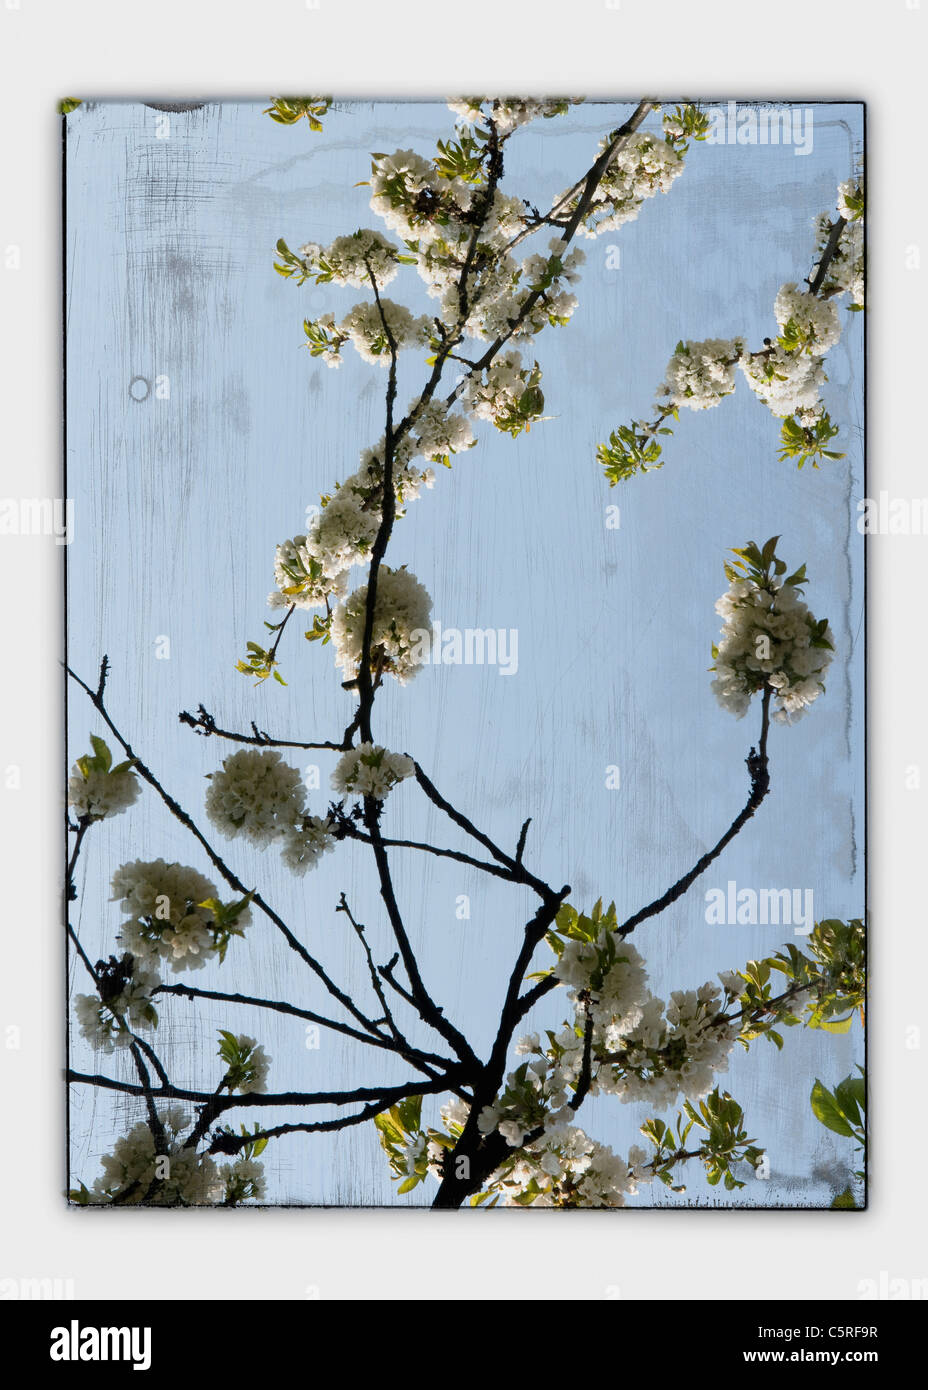 Collage, Cherry blossom seen through window, close-up Stock Photo - Alamy